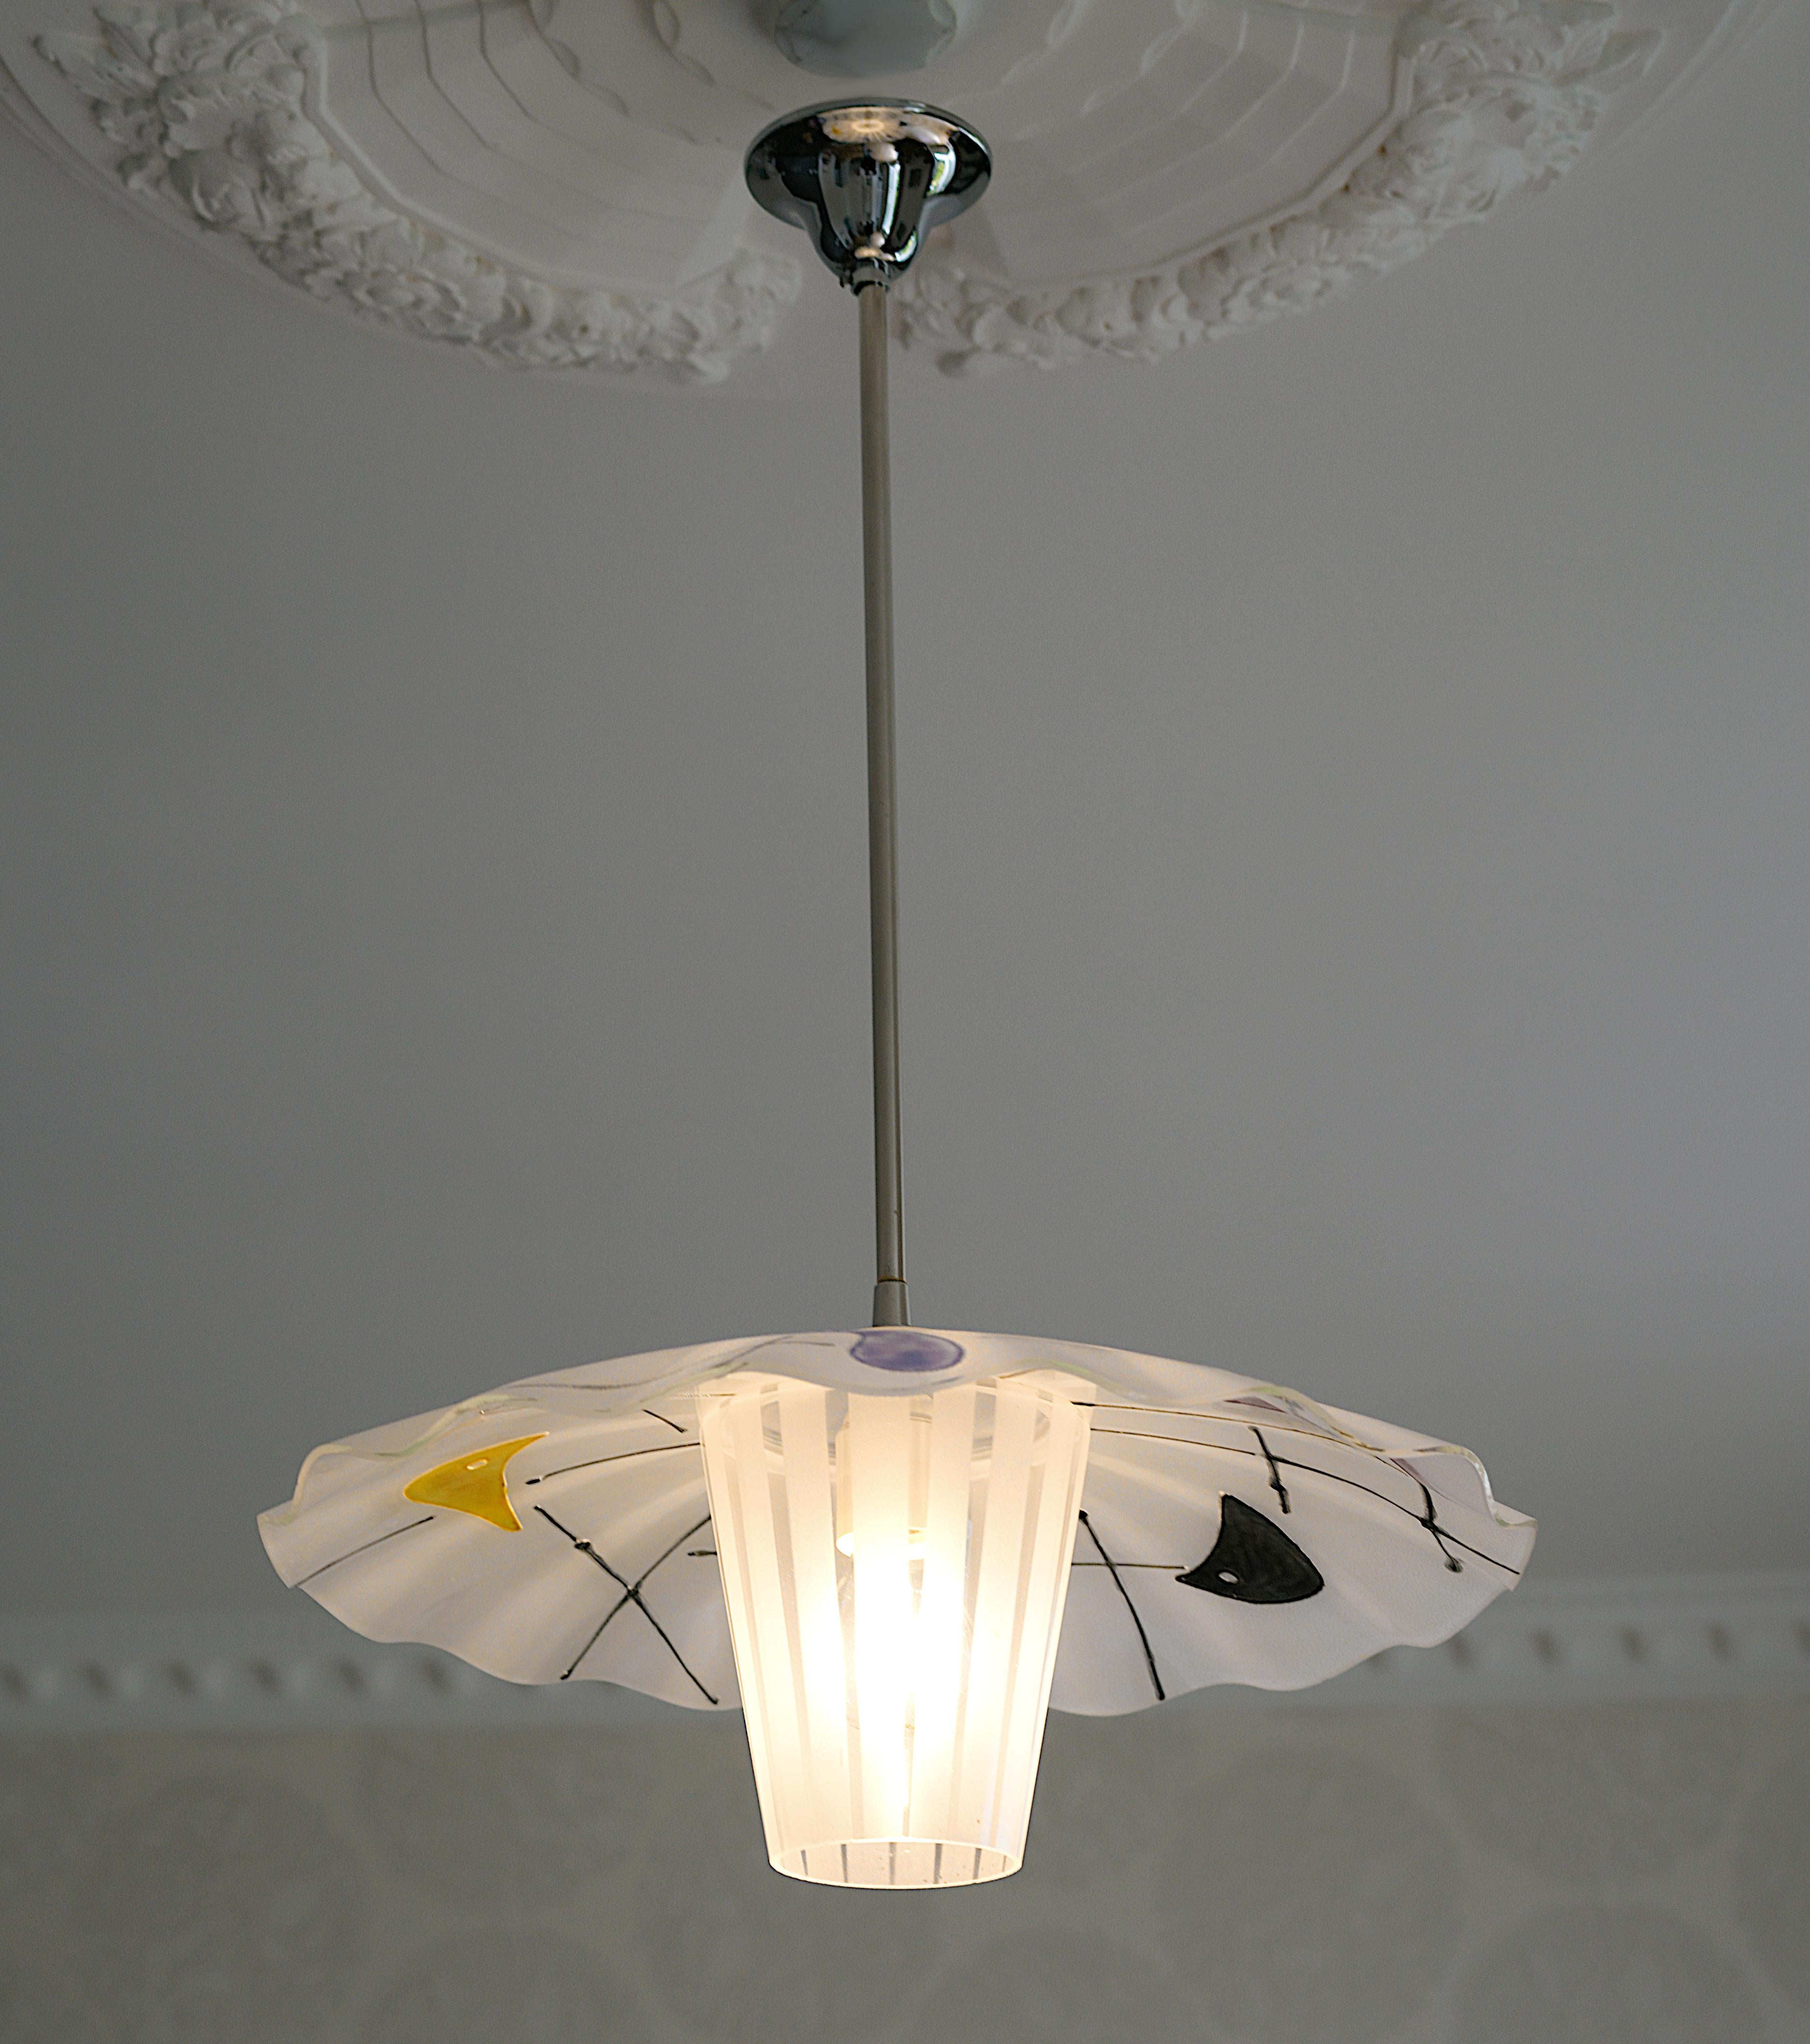 French Midcentury Pendant Chandelier, 1950s For Sale 1